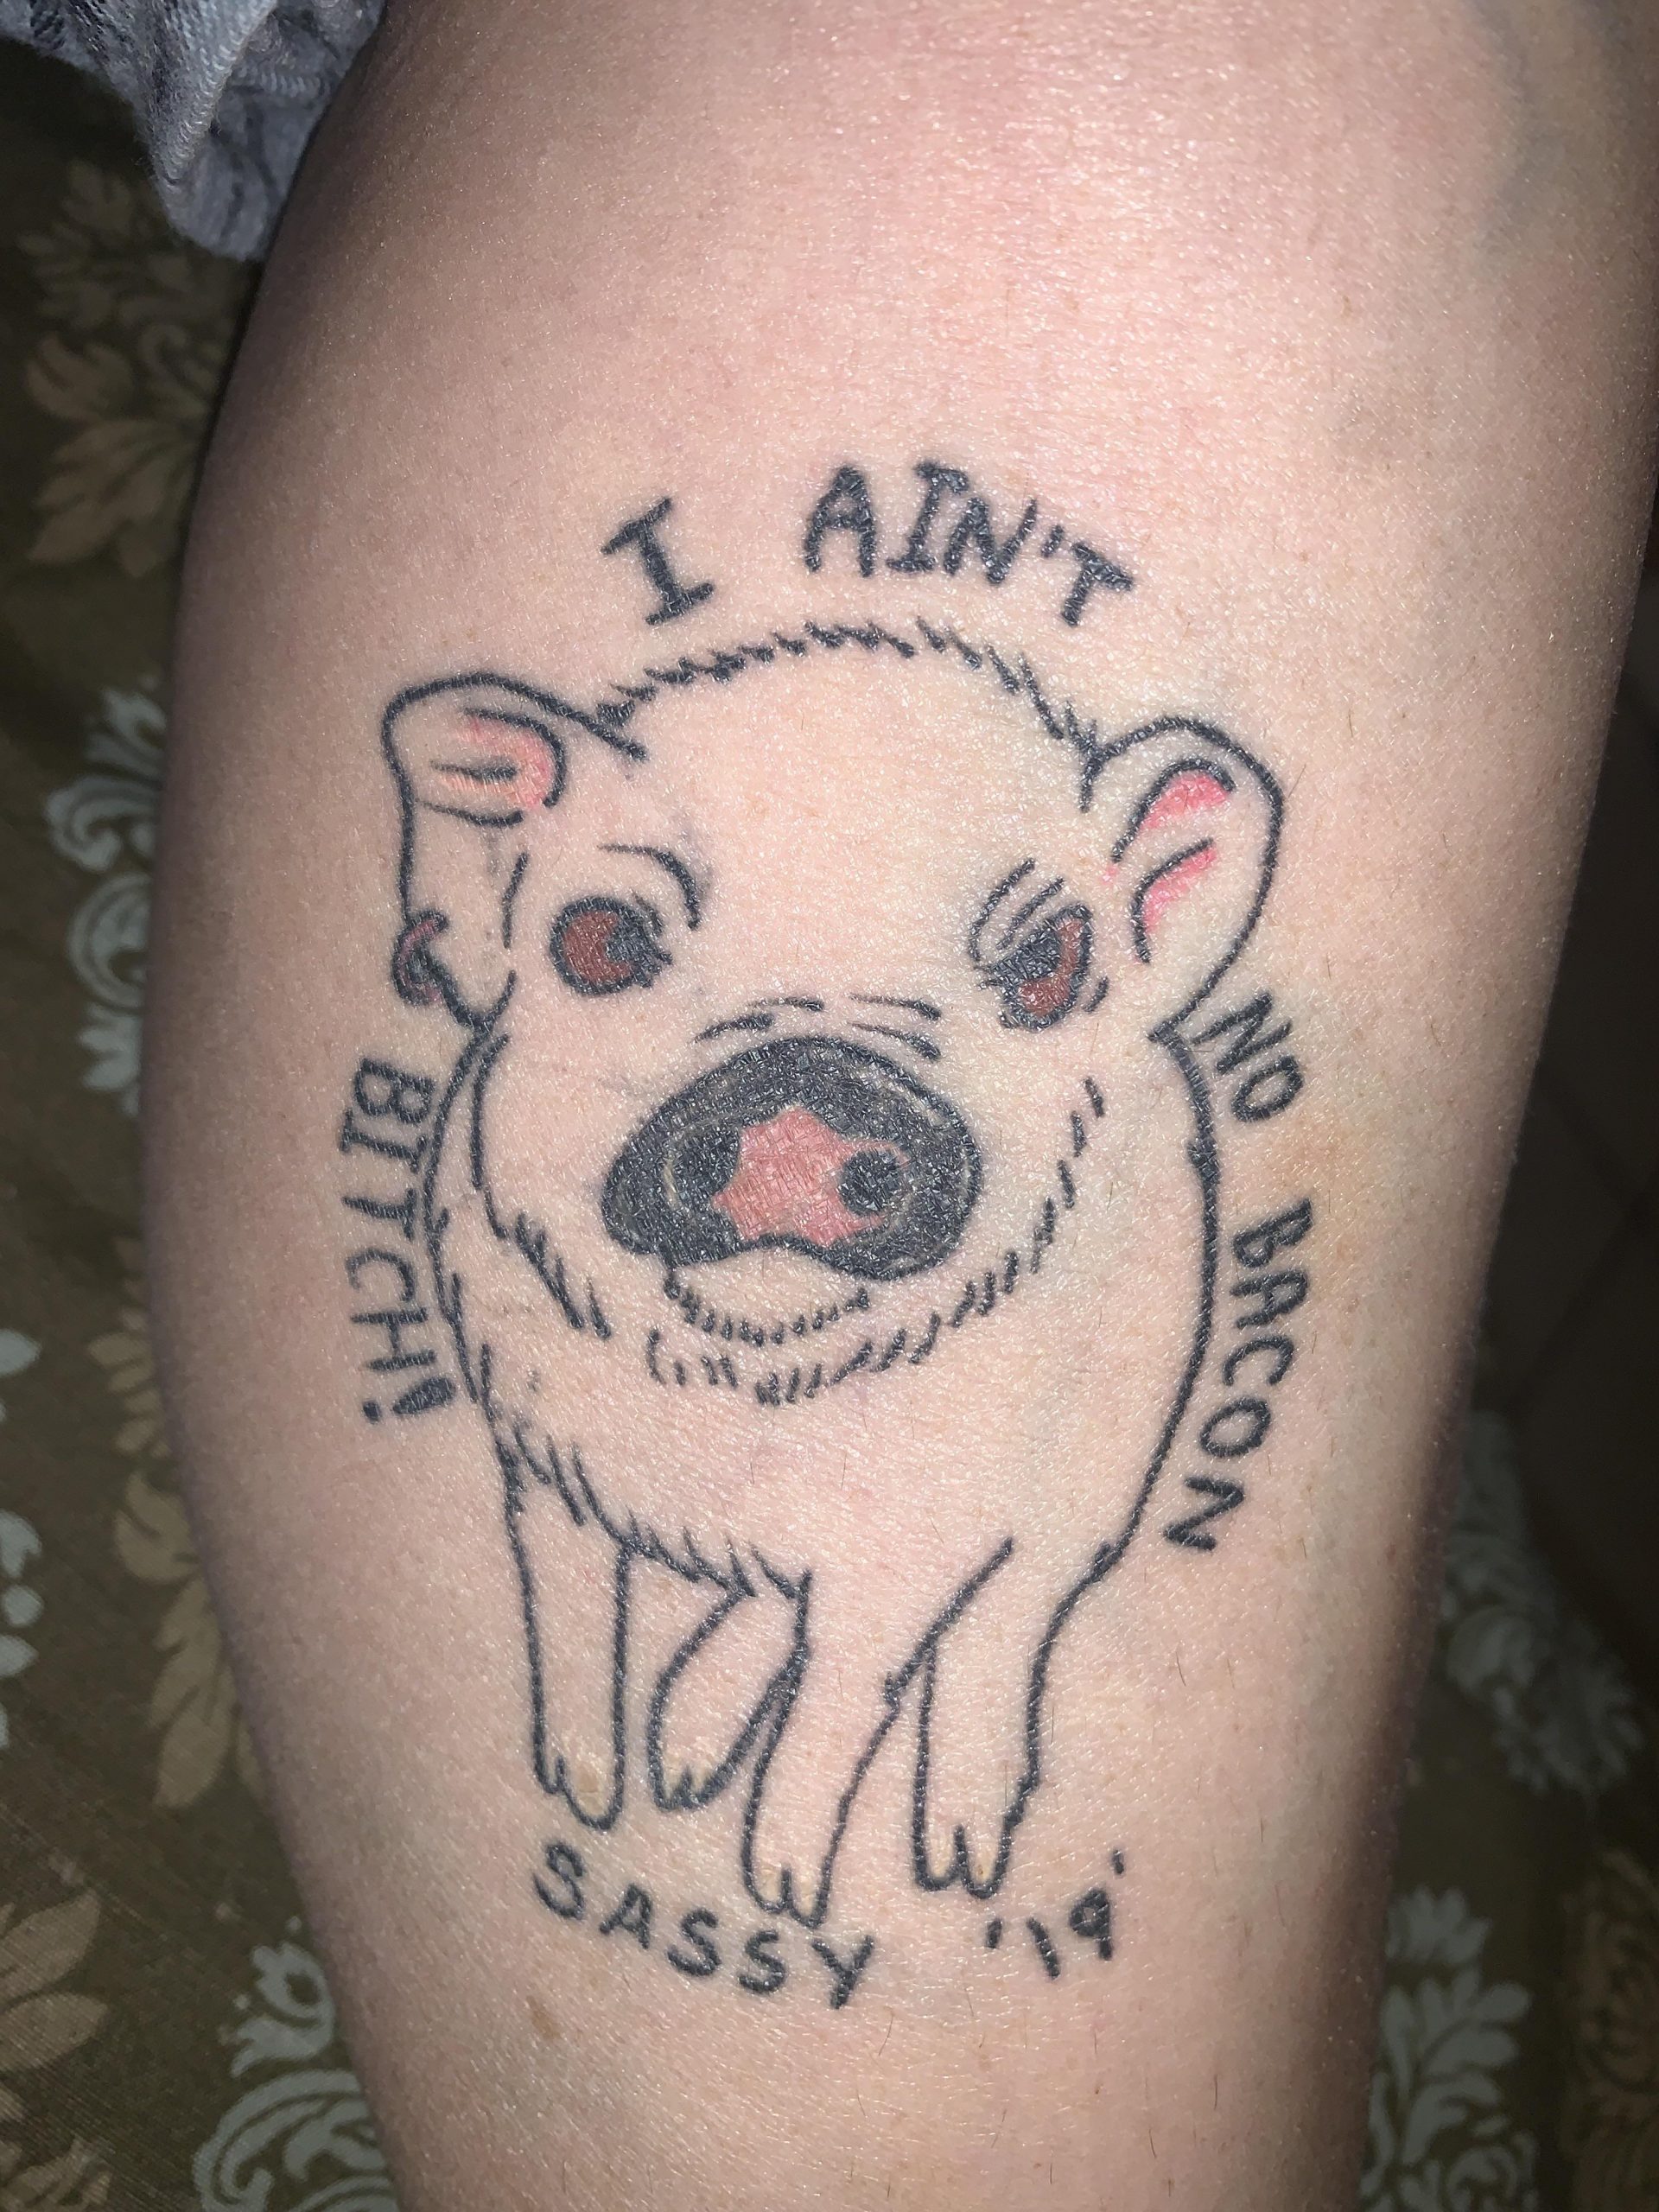 What’s Your Funniest Tattoo This Is My